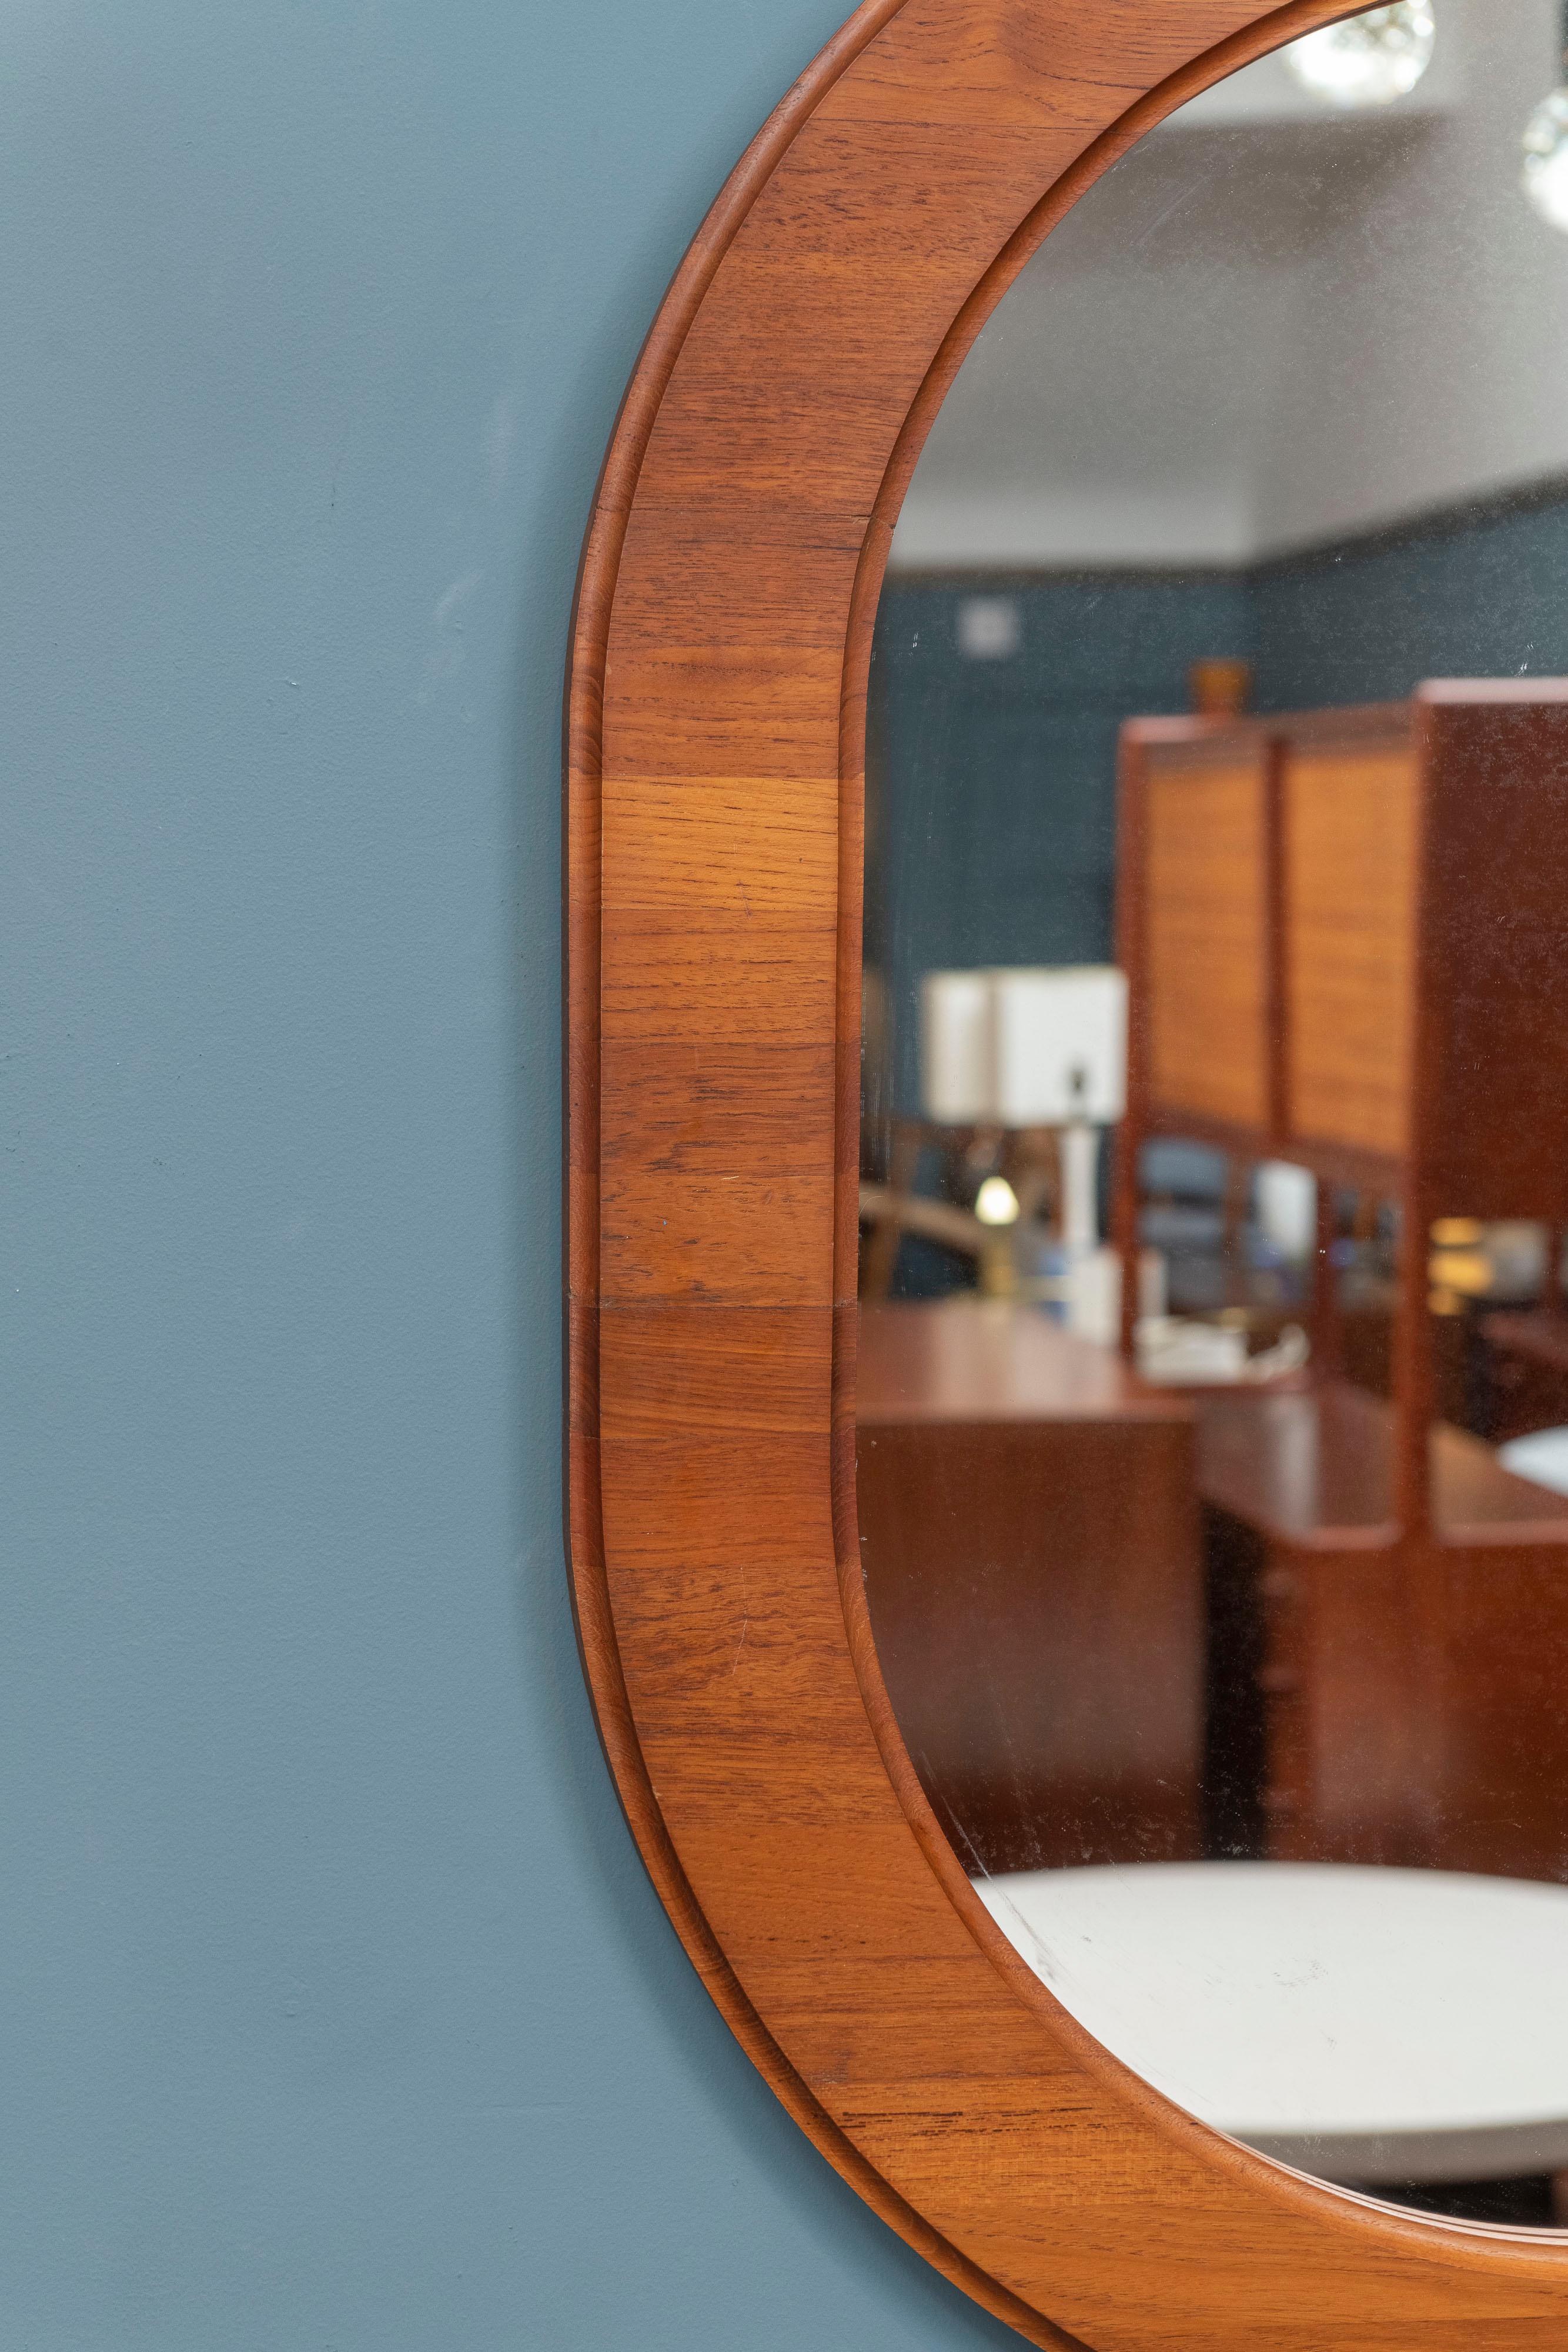 Scandinavian oval teak wall mirror, high quality design and construction ready to install.